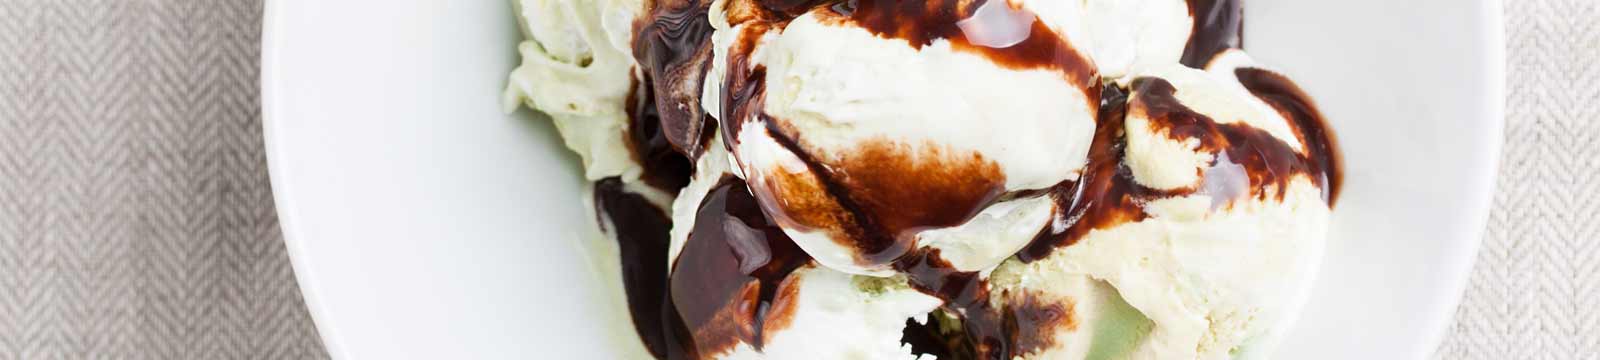 An Ice Cream dessert with fudge topping